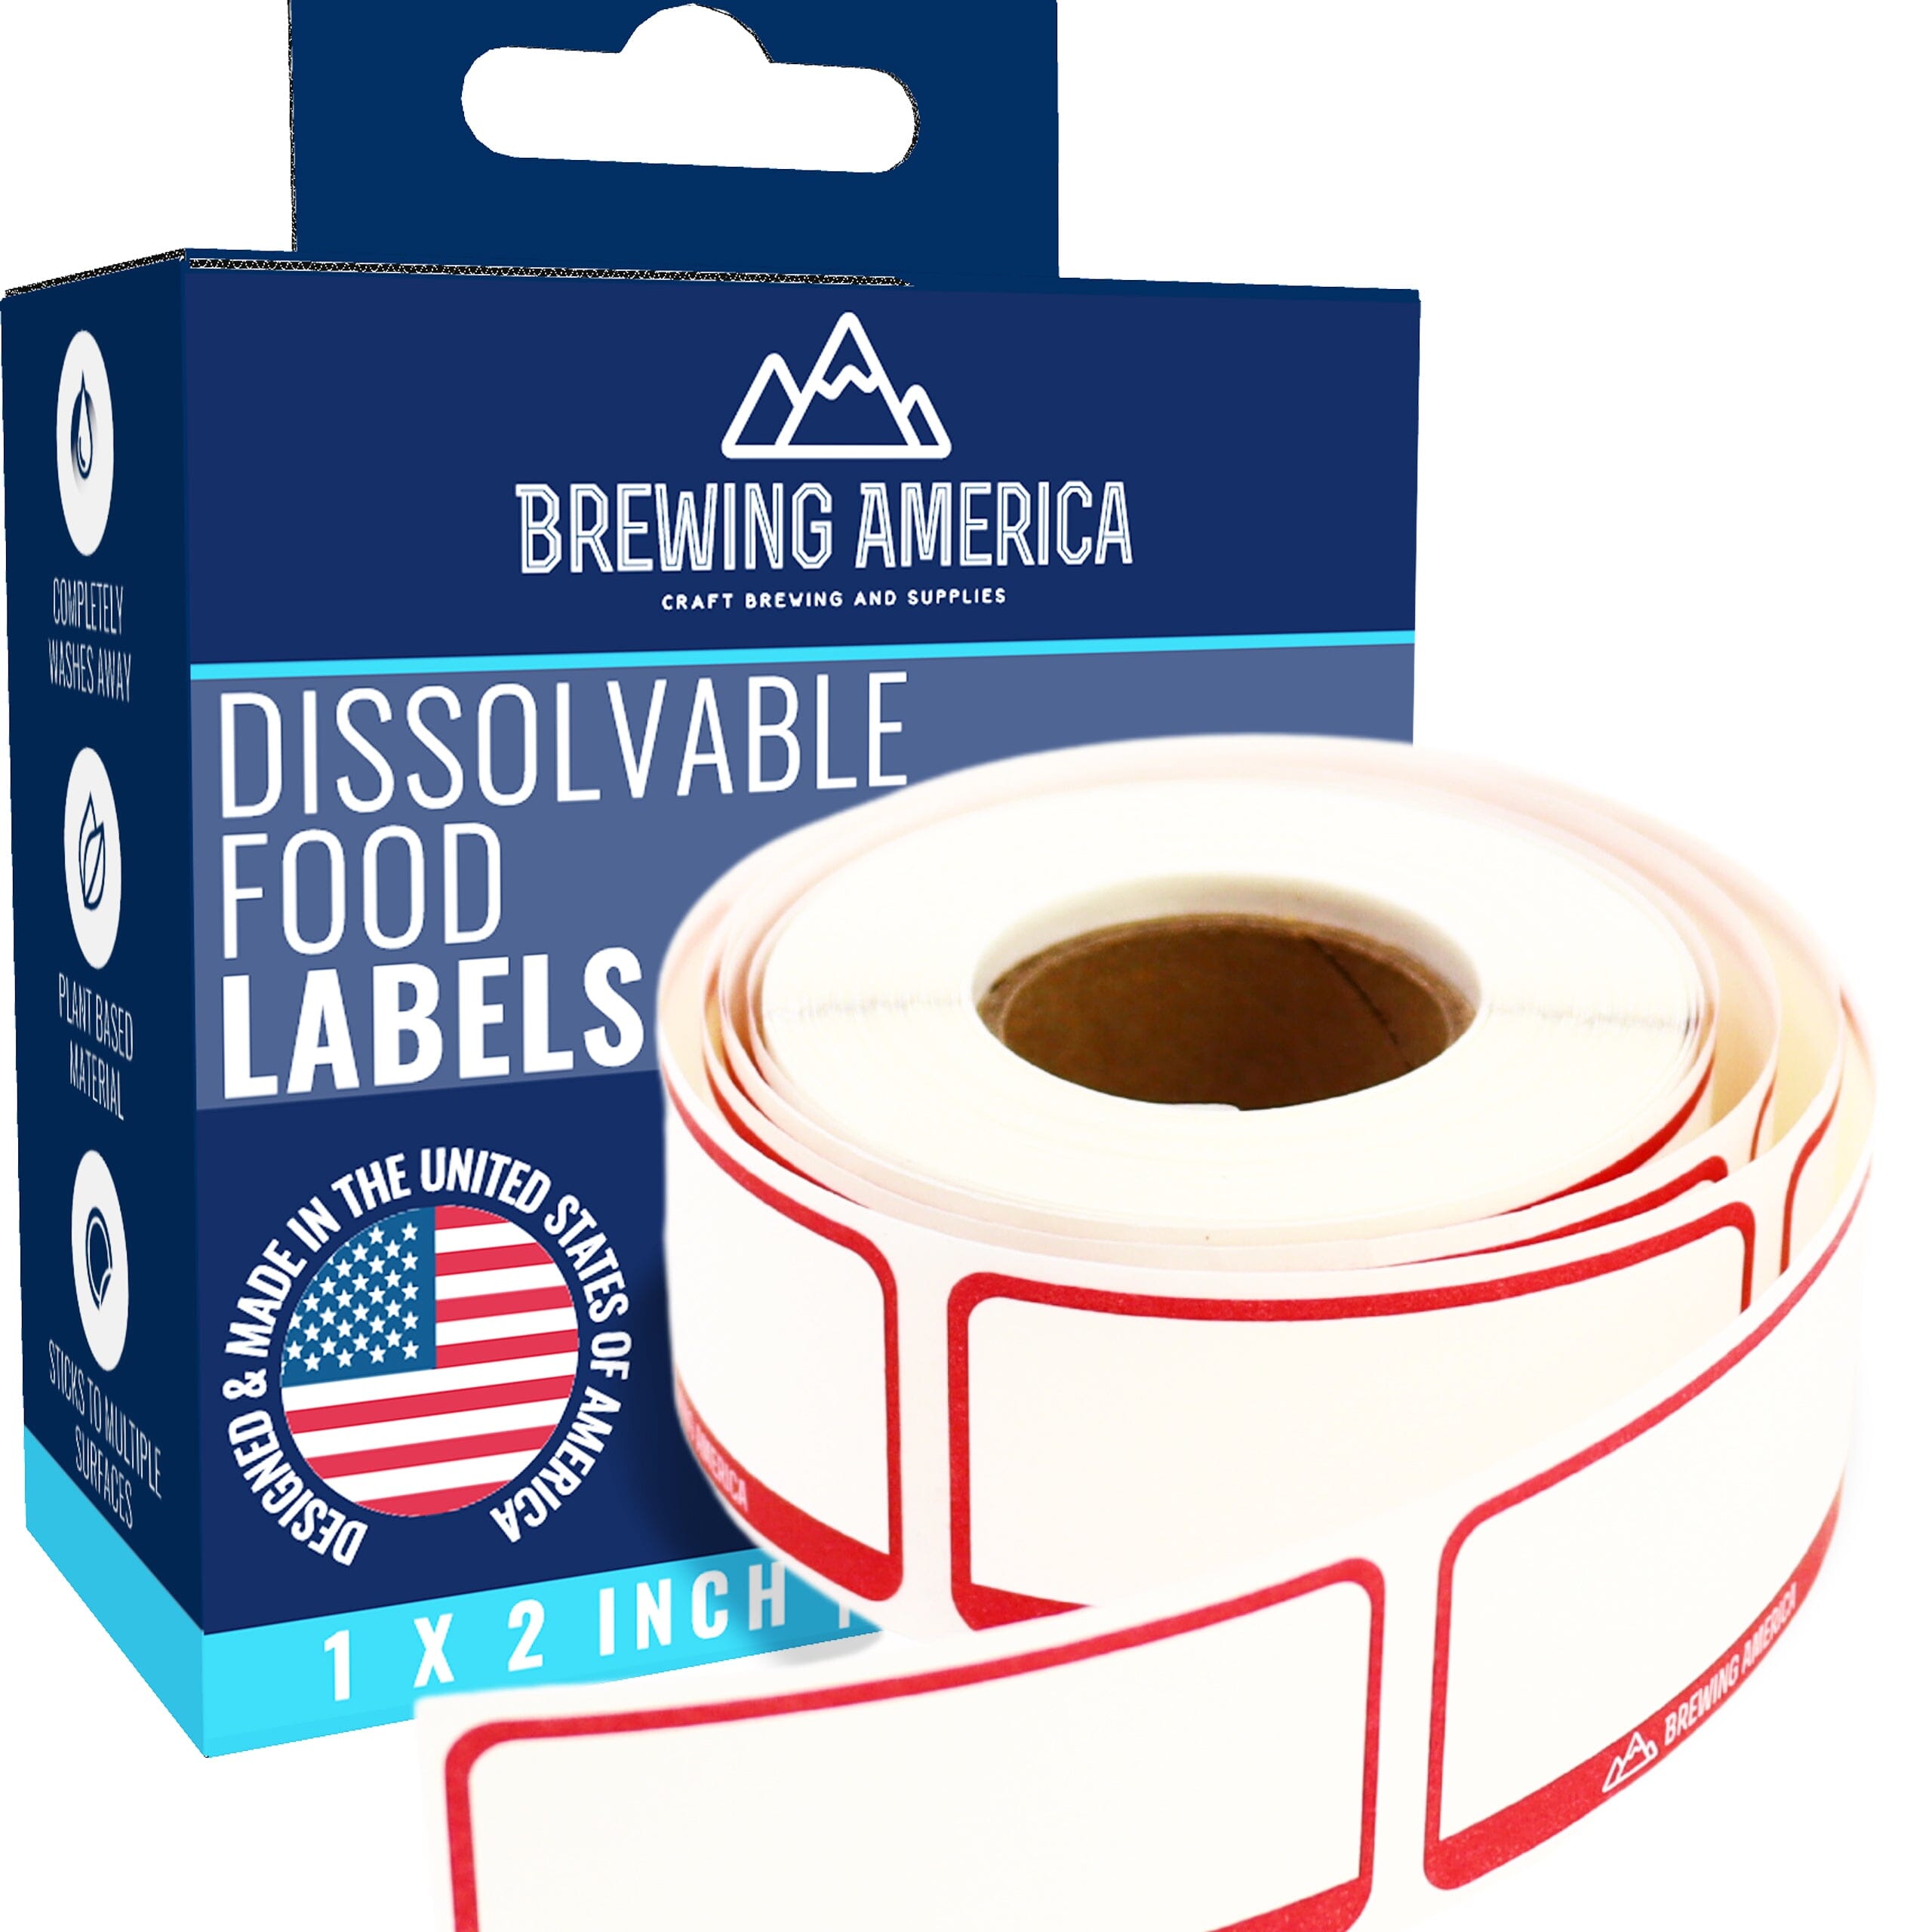 Dissolvable Food Labels for Food Containers Glass, Plastic or Metal No Scrubbing, No Residue - Old Glory Red Accessories Brewing America 